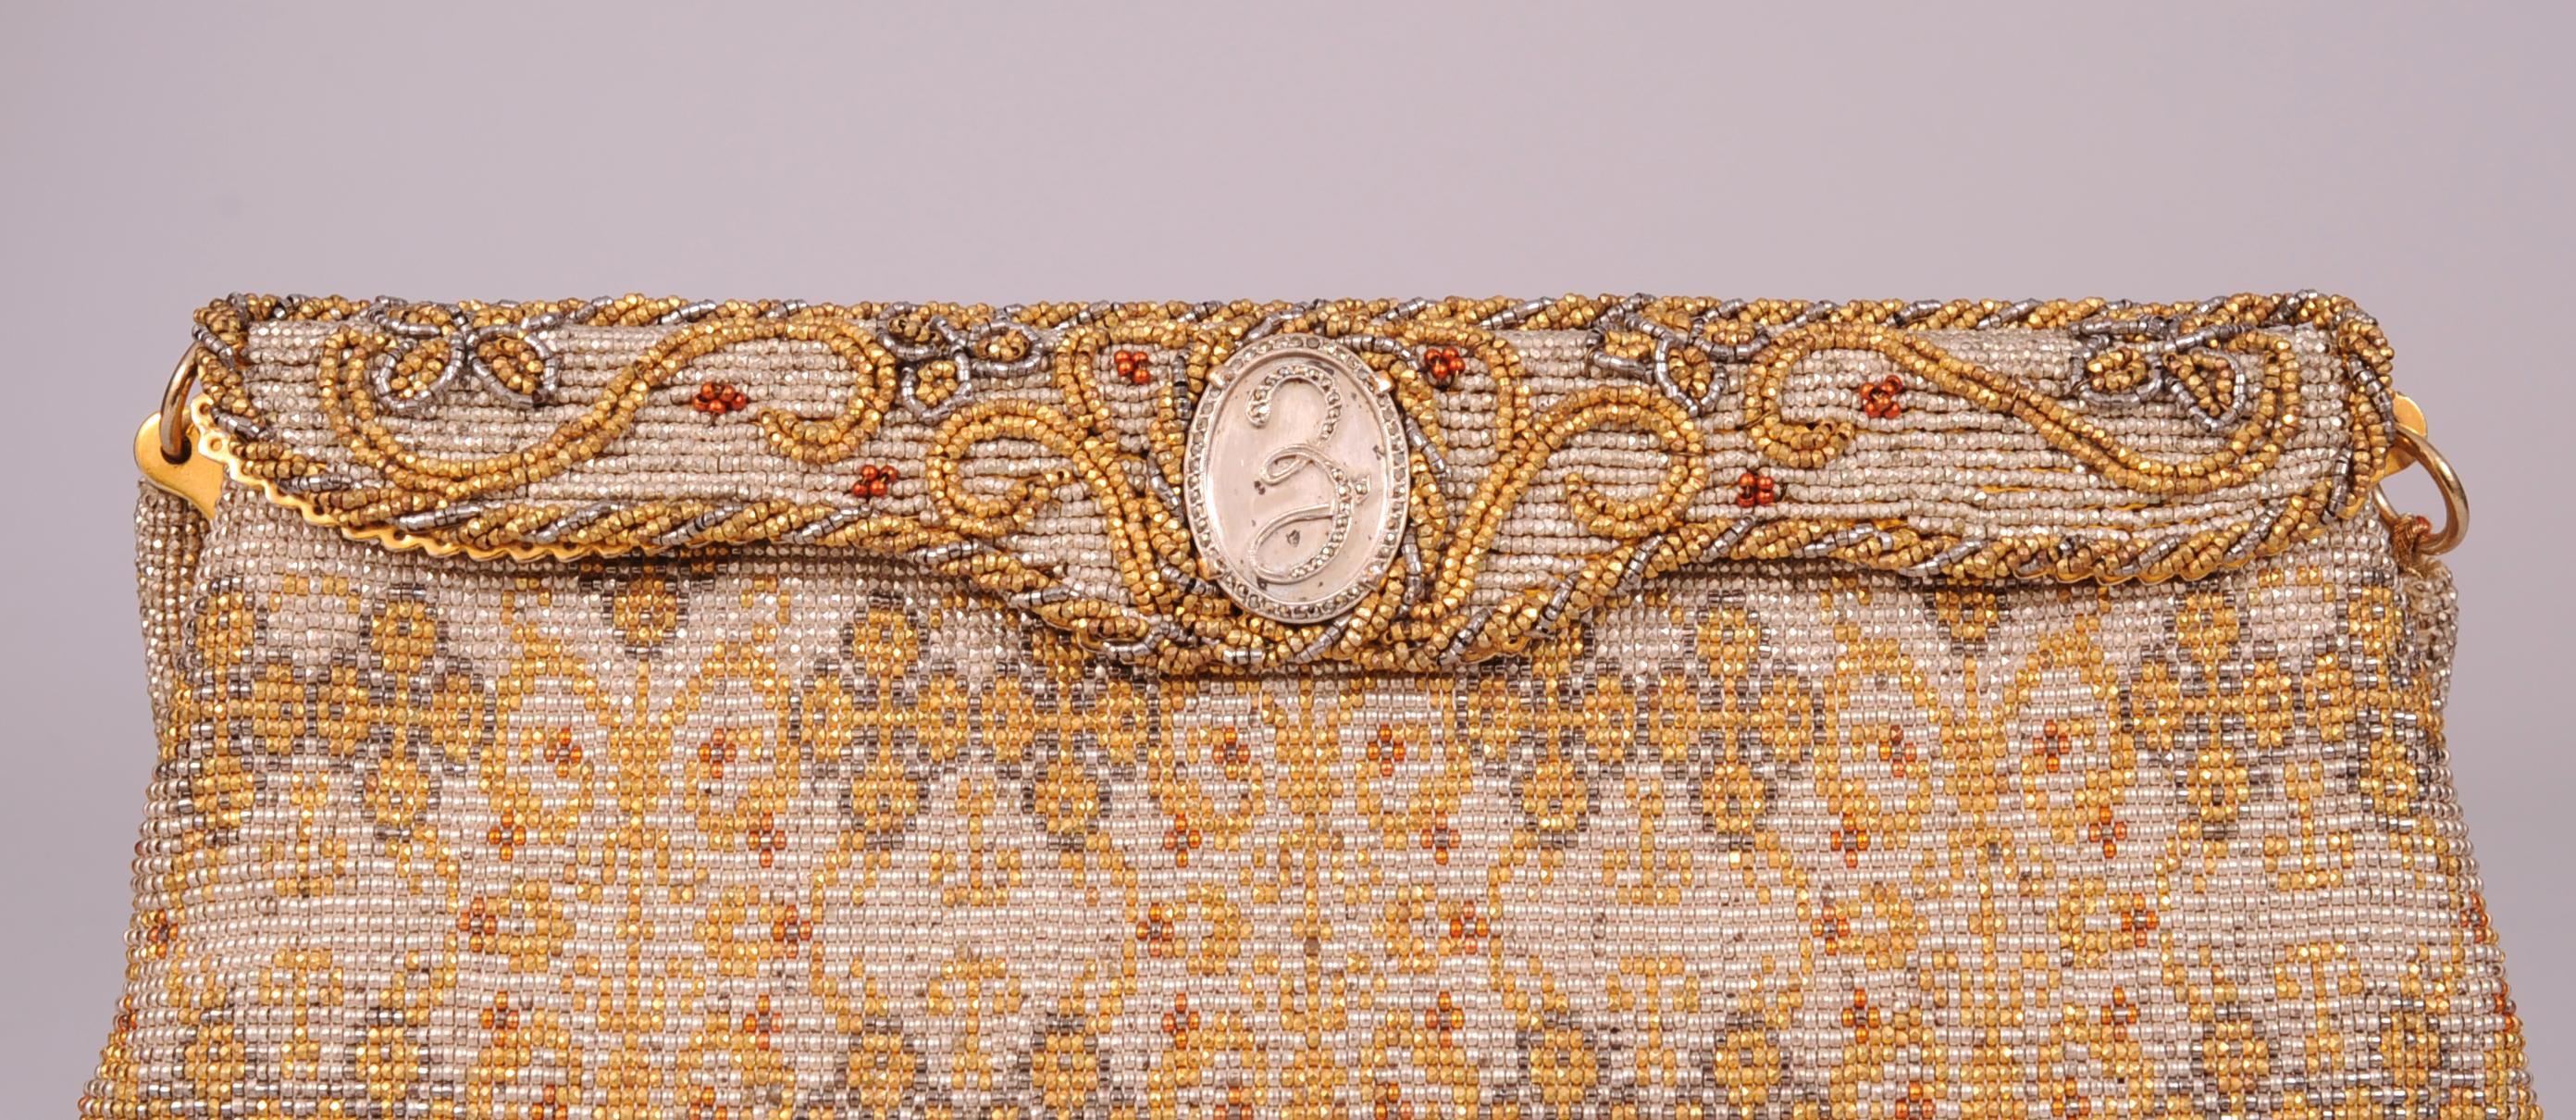 Beautifully hand beaded in France this Morabito bag has a platinum beaded background with designs worked in gold, silver and a touch of red. The frame is completely beaded with a meandering flower and vine design applied to the beaded background